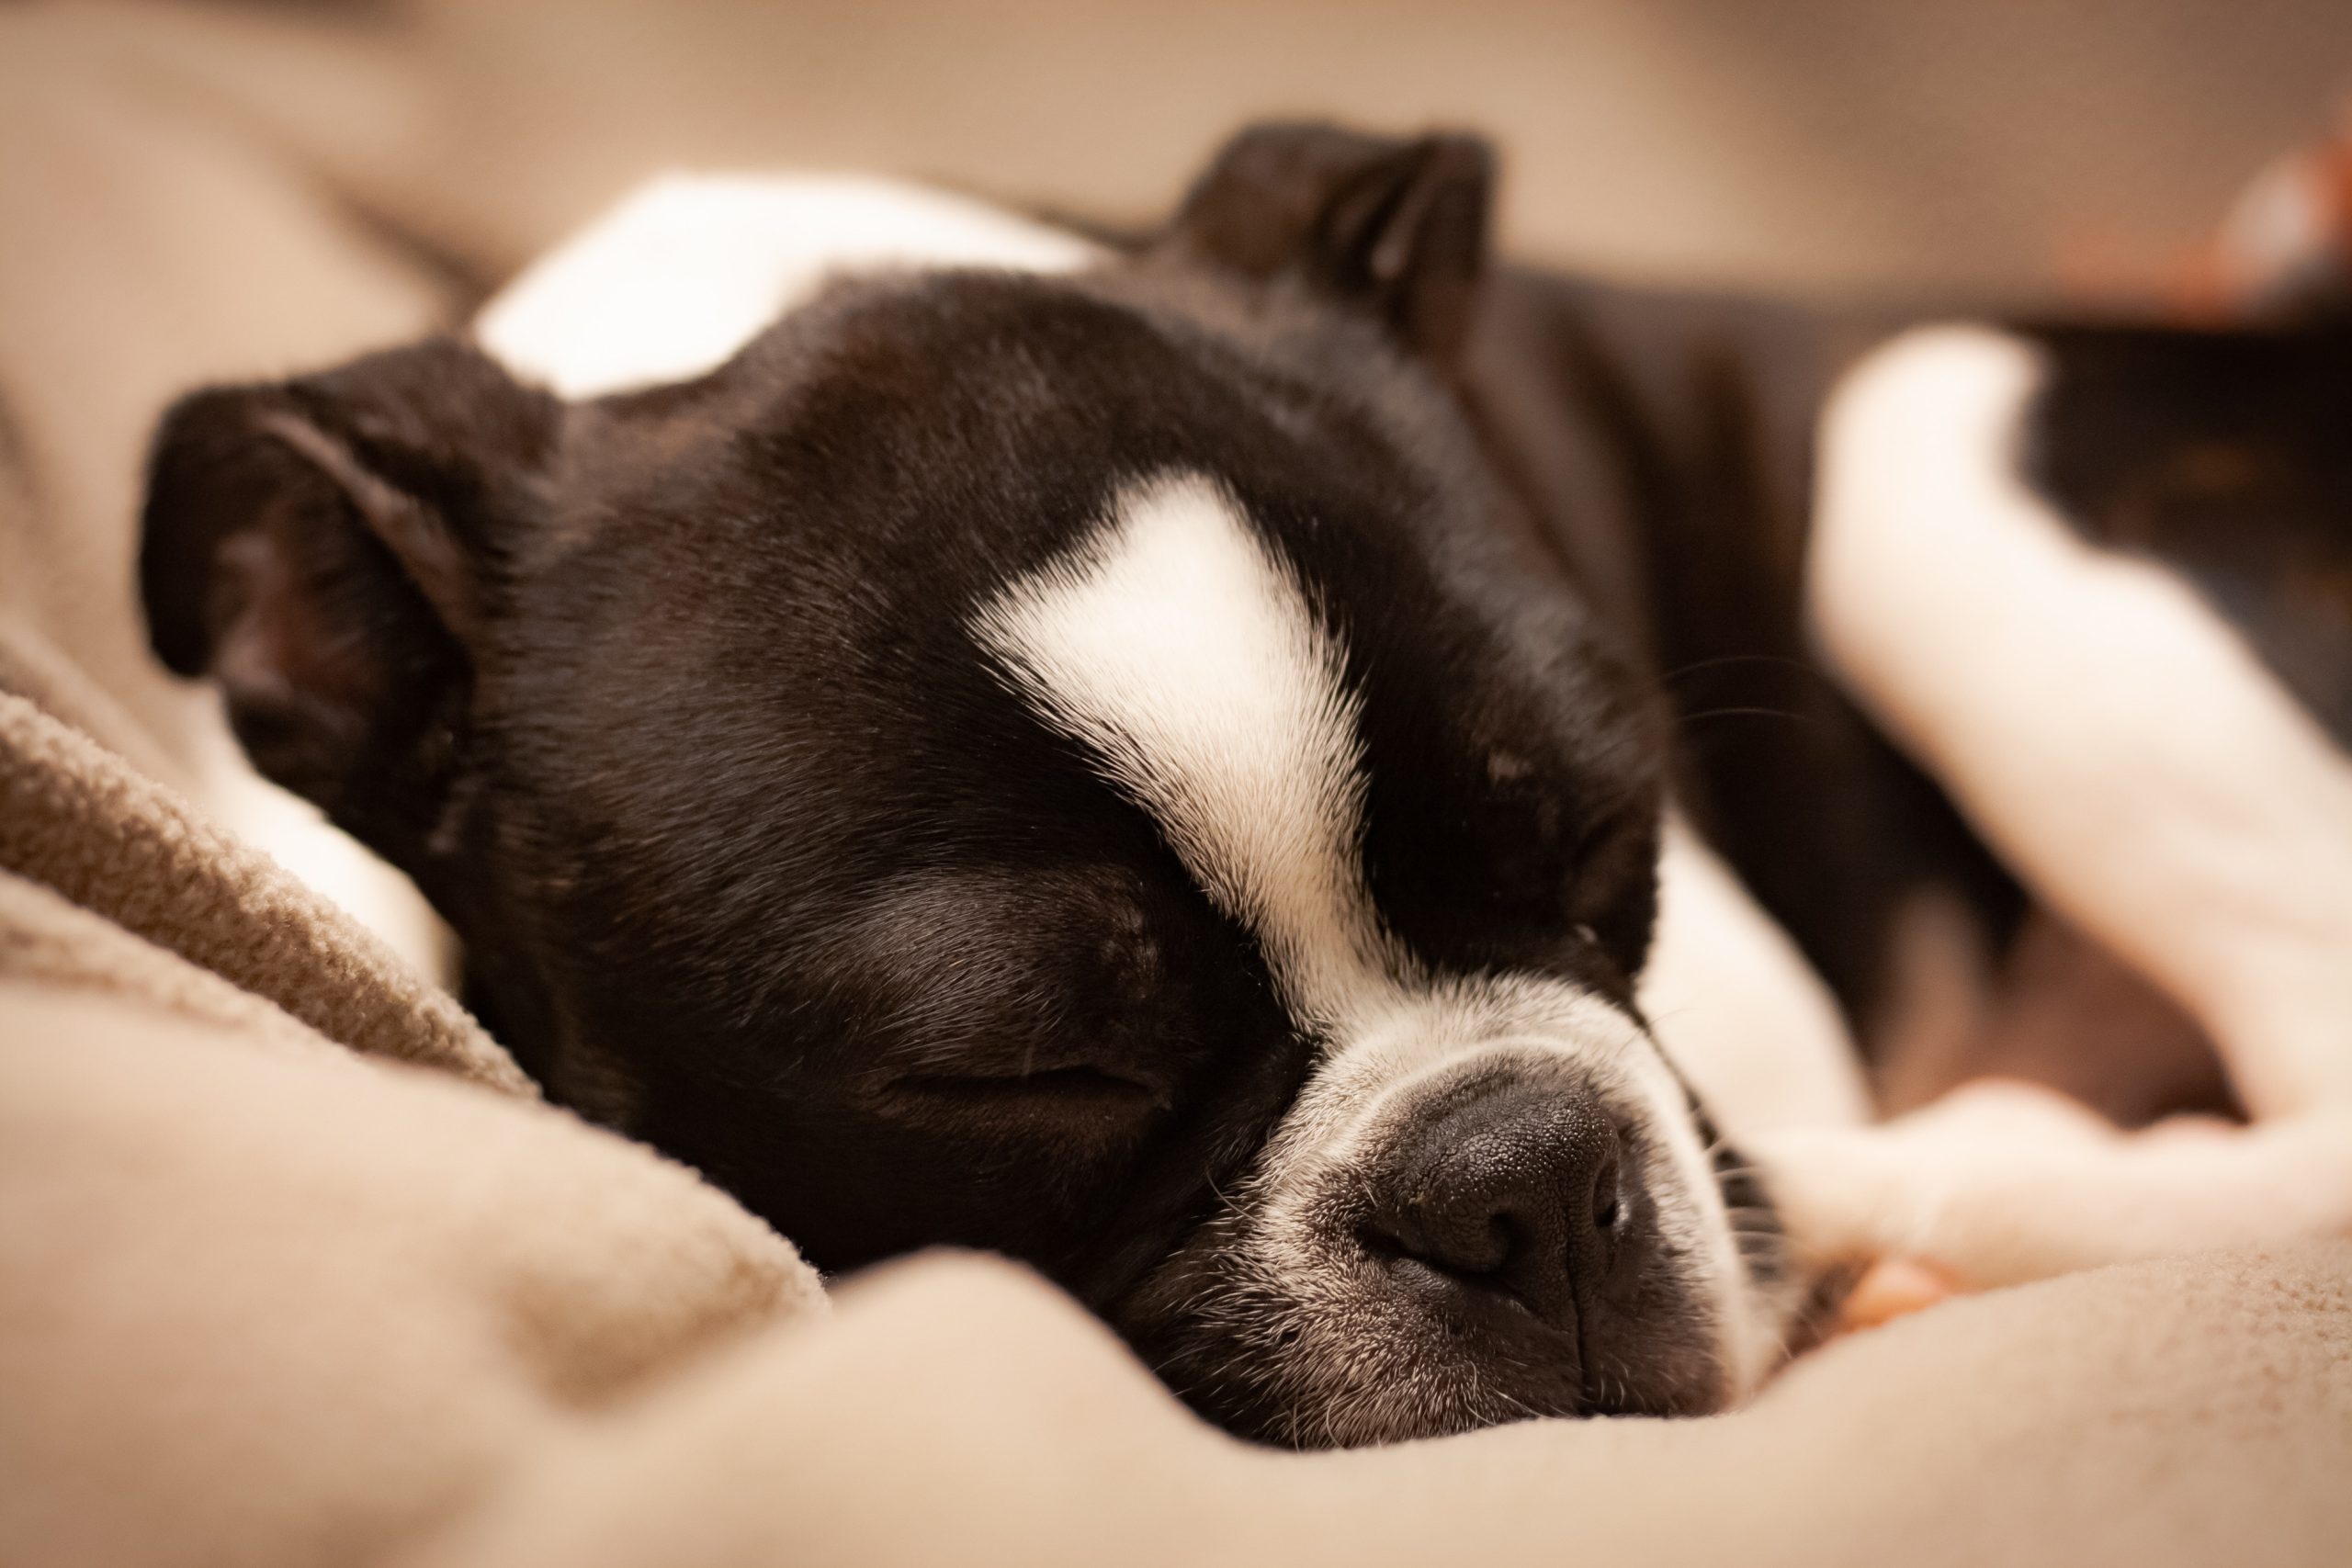 9 Dogs' Sleeping Positions And What They Reveal About Their Personality and Health